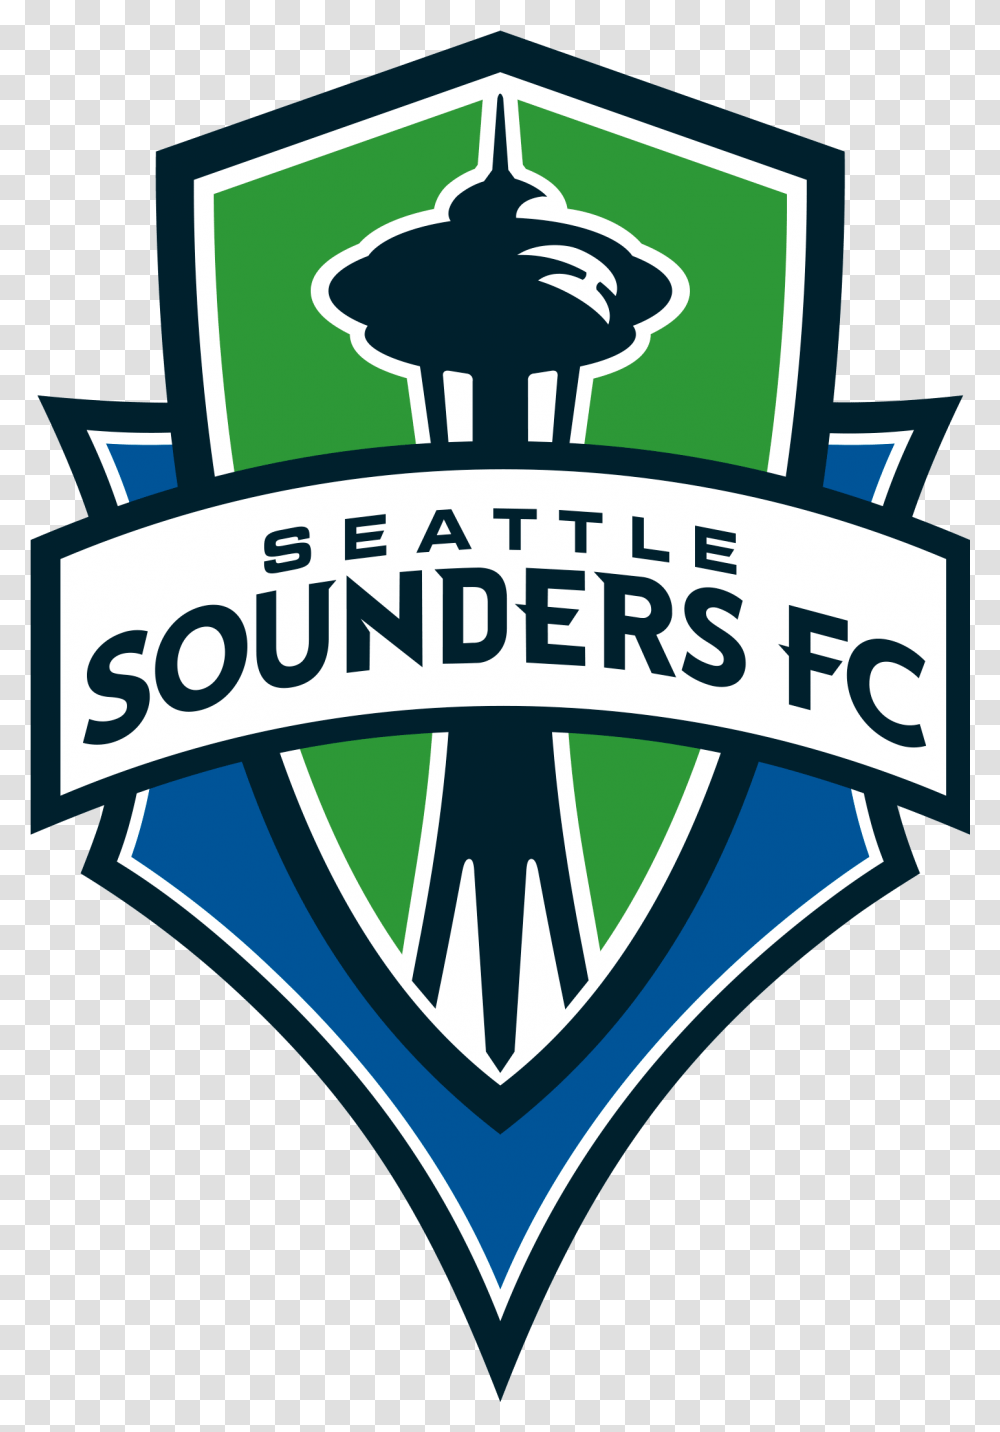 Seattle Sounders Fc Logo History & Meaning Seattle Sounders Logo, Symbol, Poster, Advertisement, Badge Transparent Png